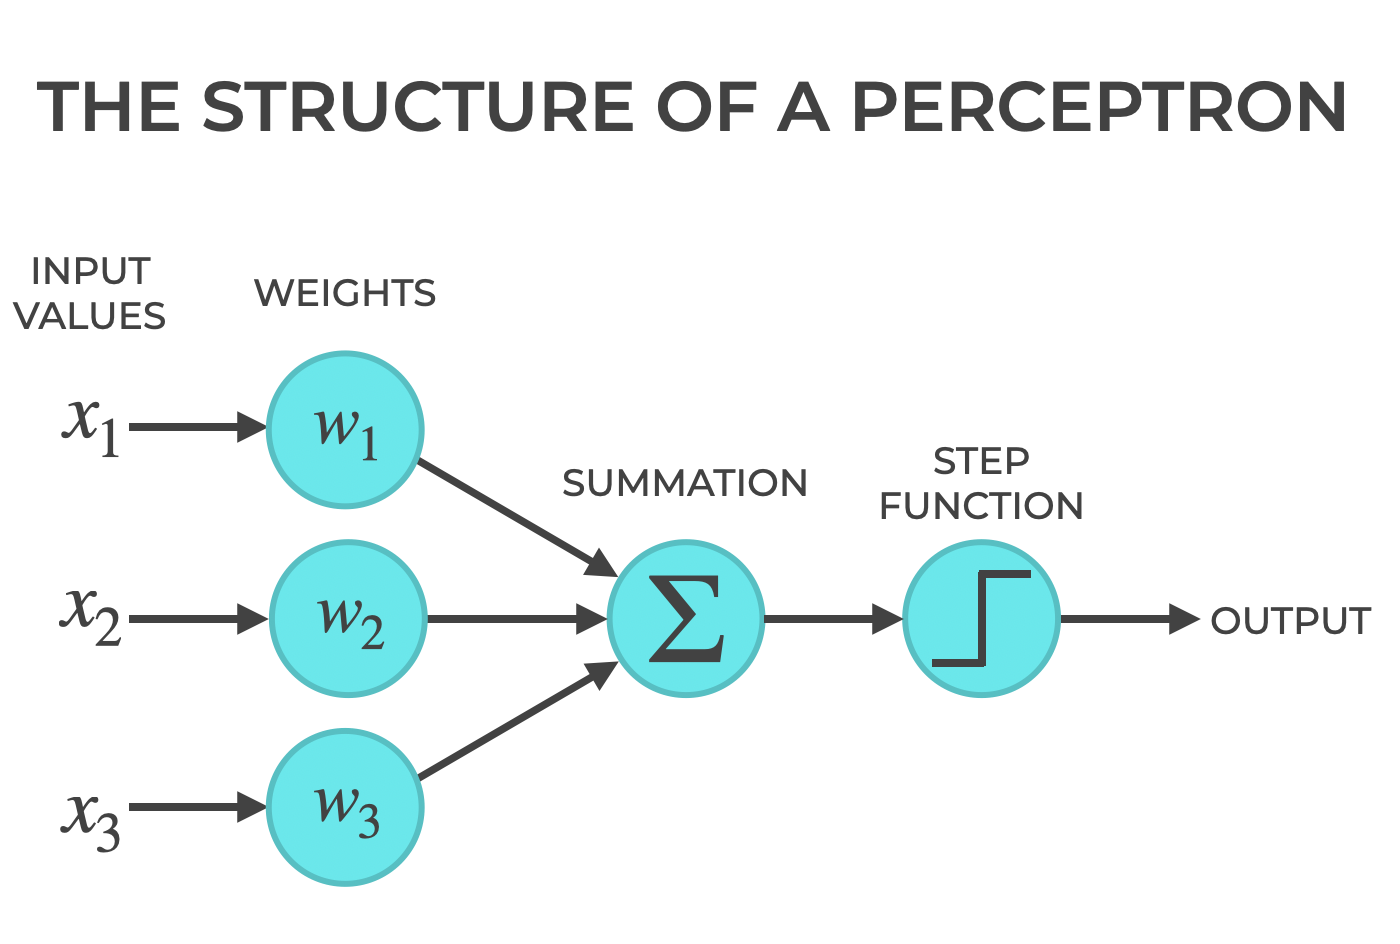 An image that visually explains the structure of a perceptron.